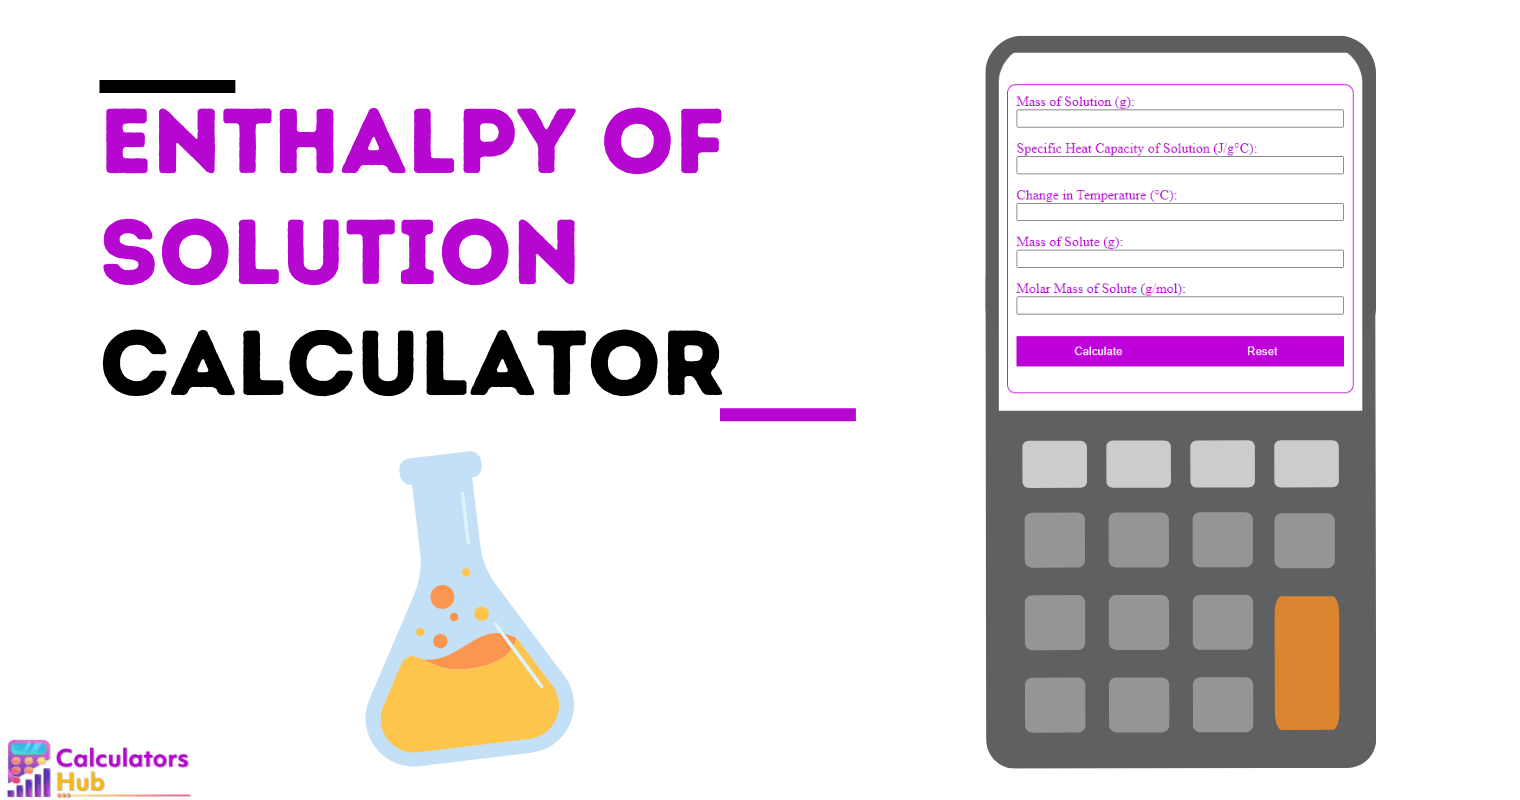 Enthalpy of Solution Calculator